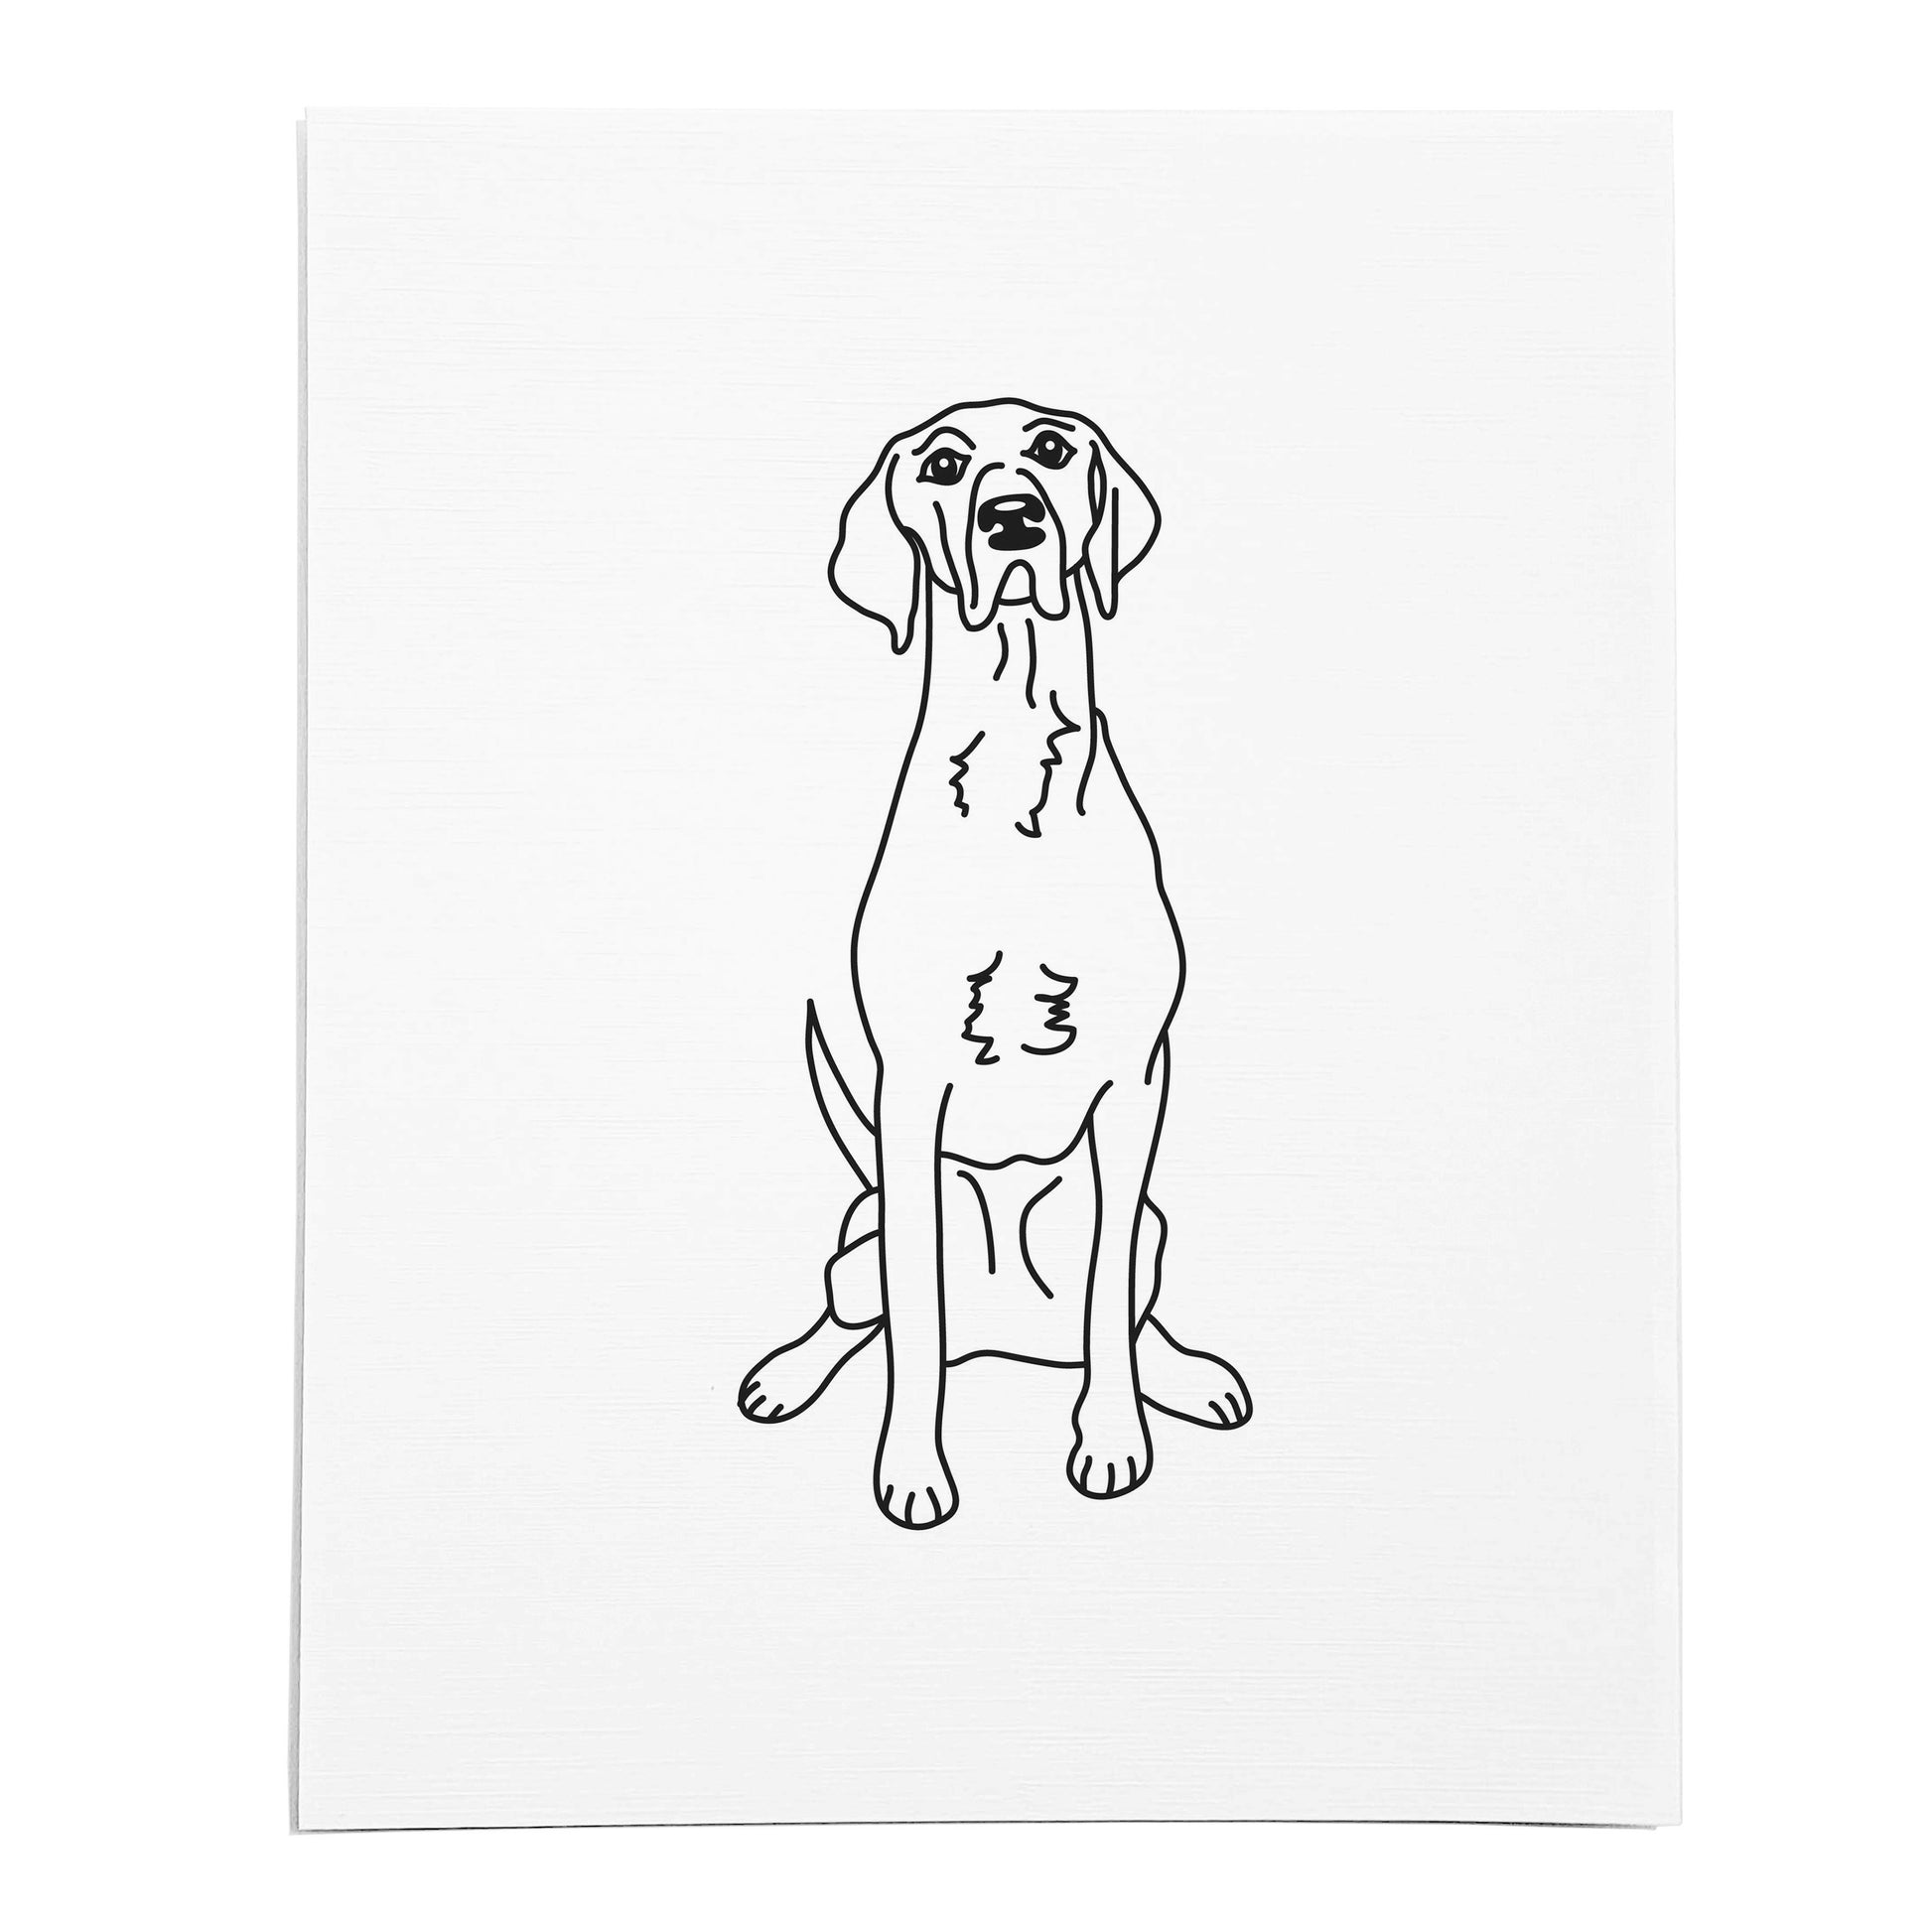 An art print featuring a line drawing of a Pointer dog on white linen paper